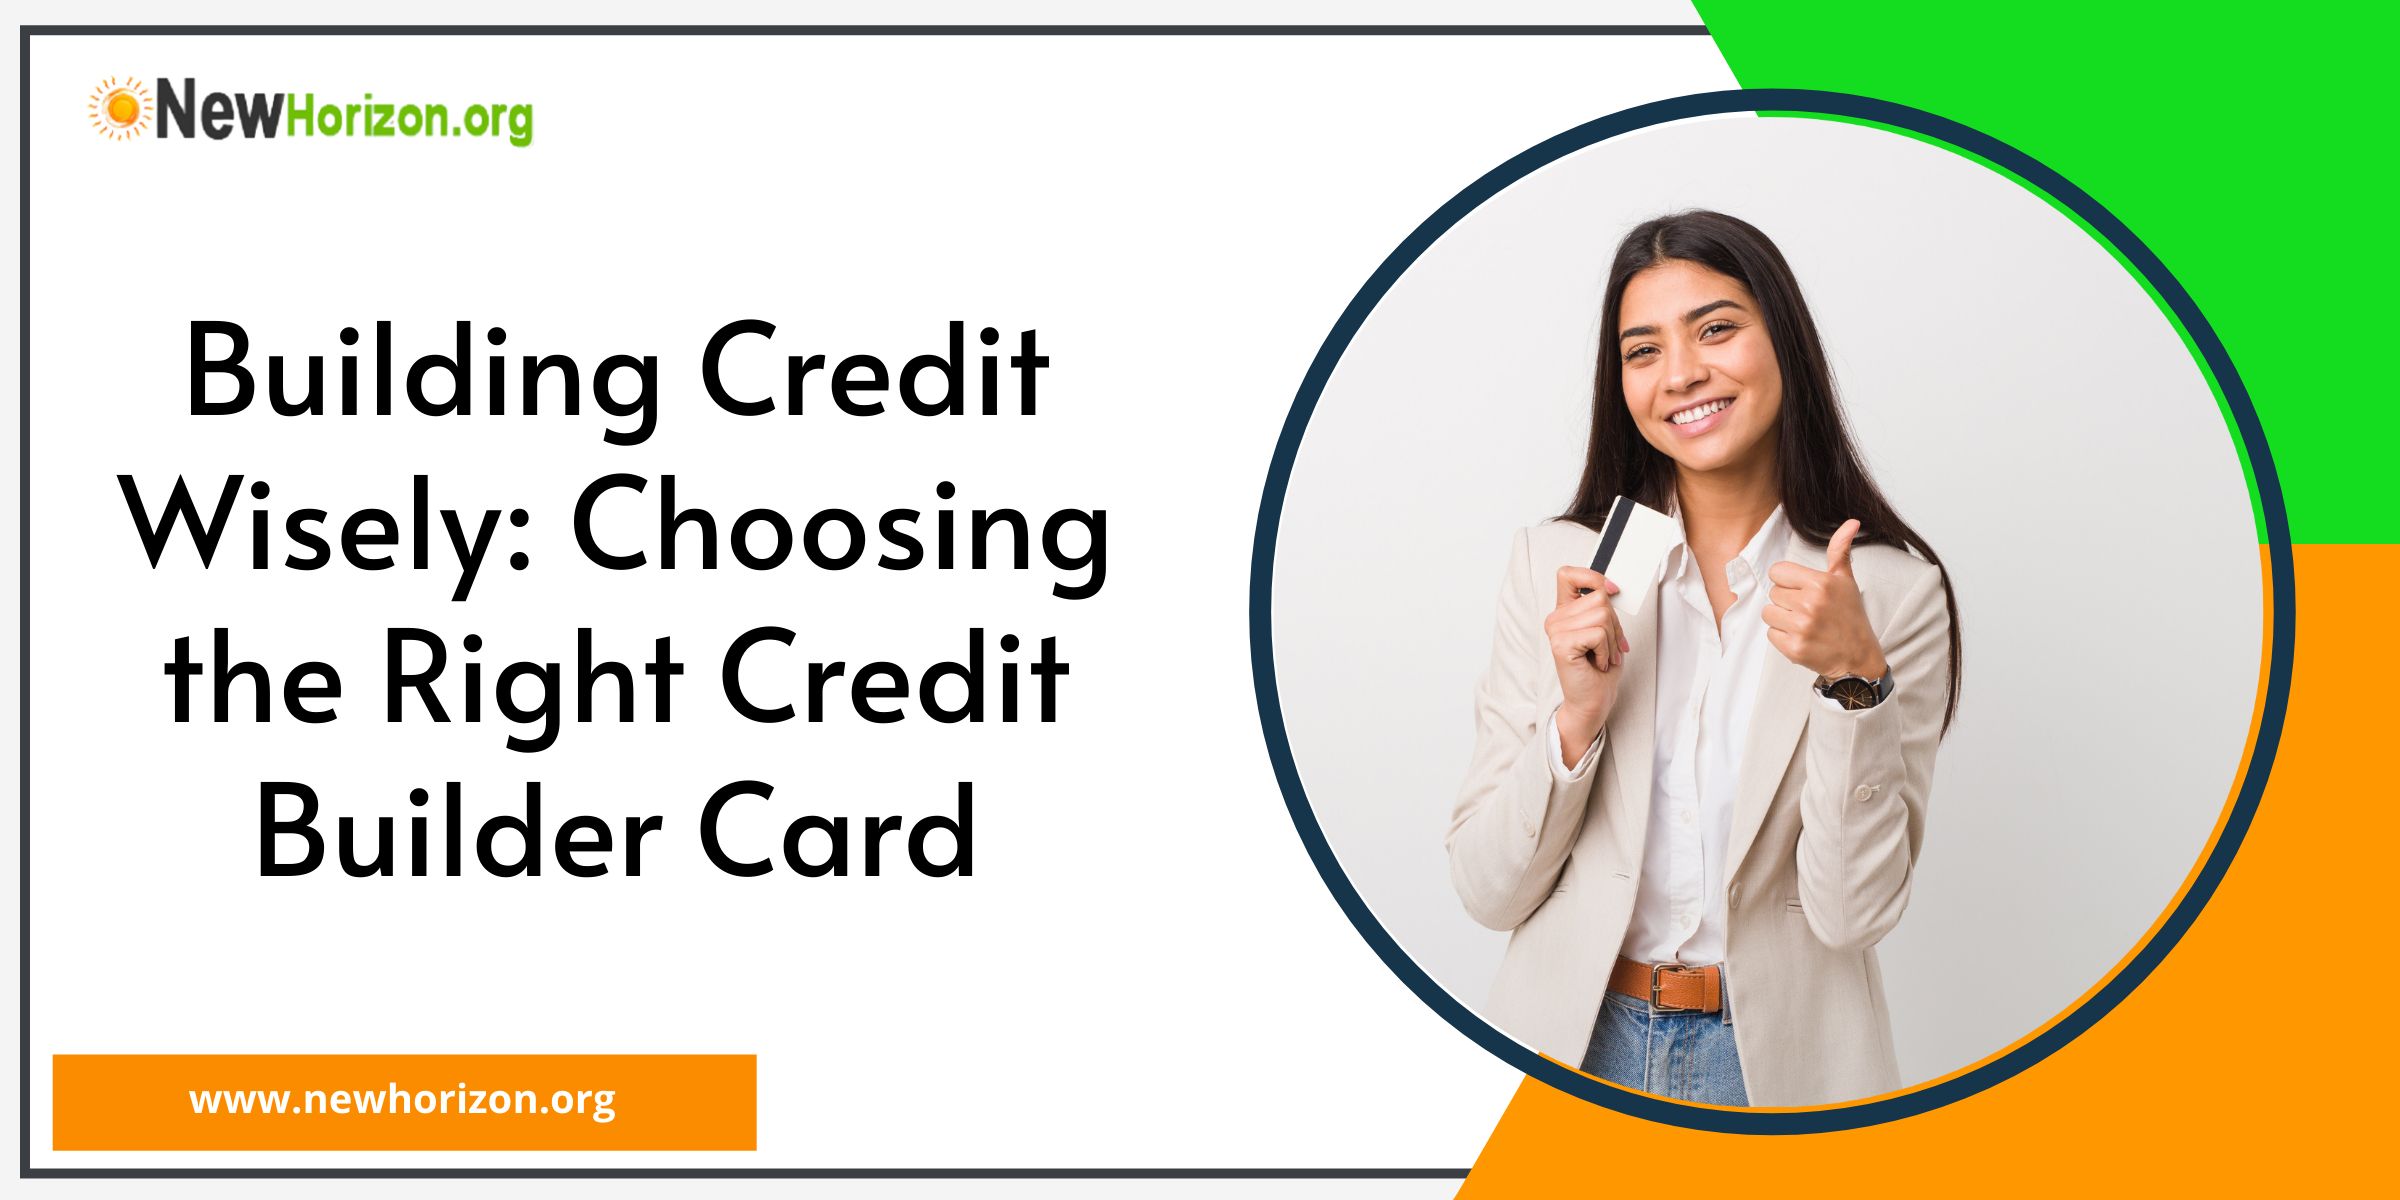 Building Credit Wisely: Choosing the Right Credit Builder Card